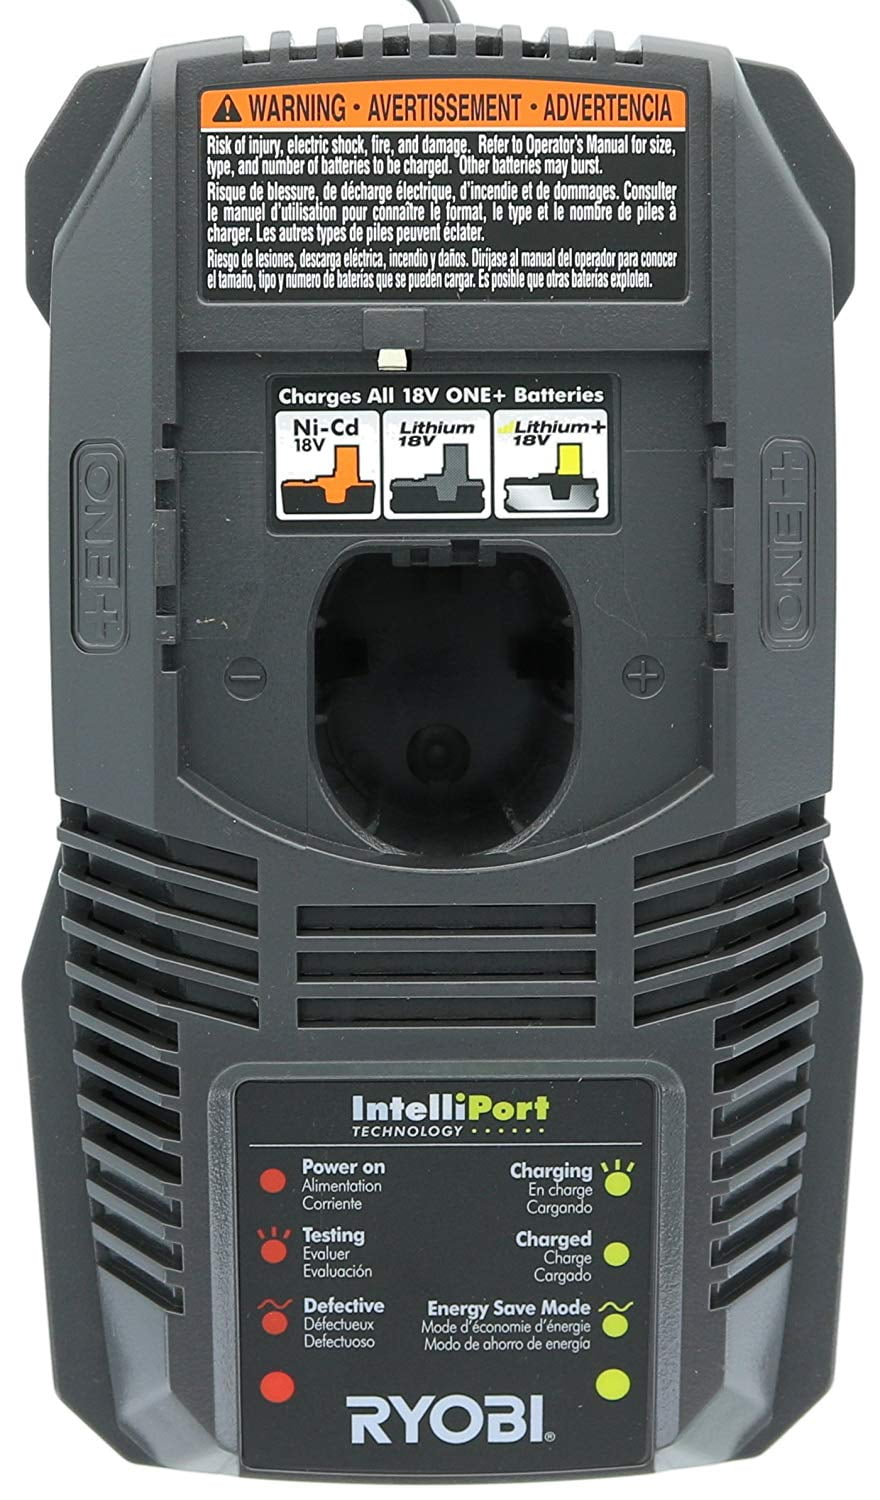 Ryobi P118 Lithium Ion Charger for One+ 18 Volt REFURBISHED Walmart.com